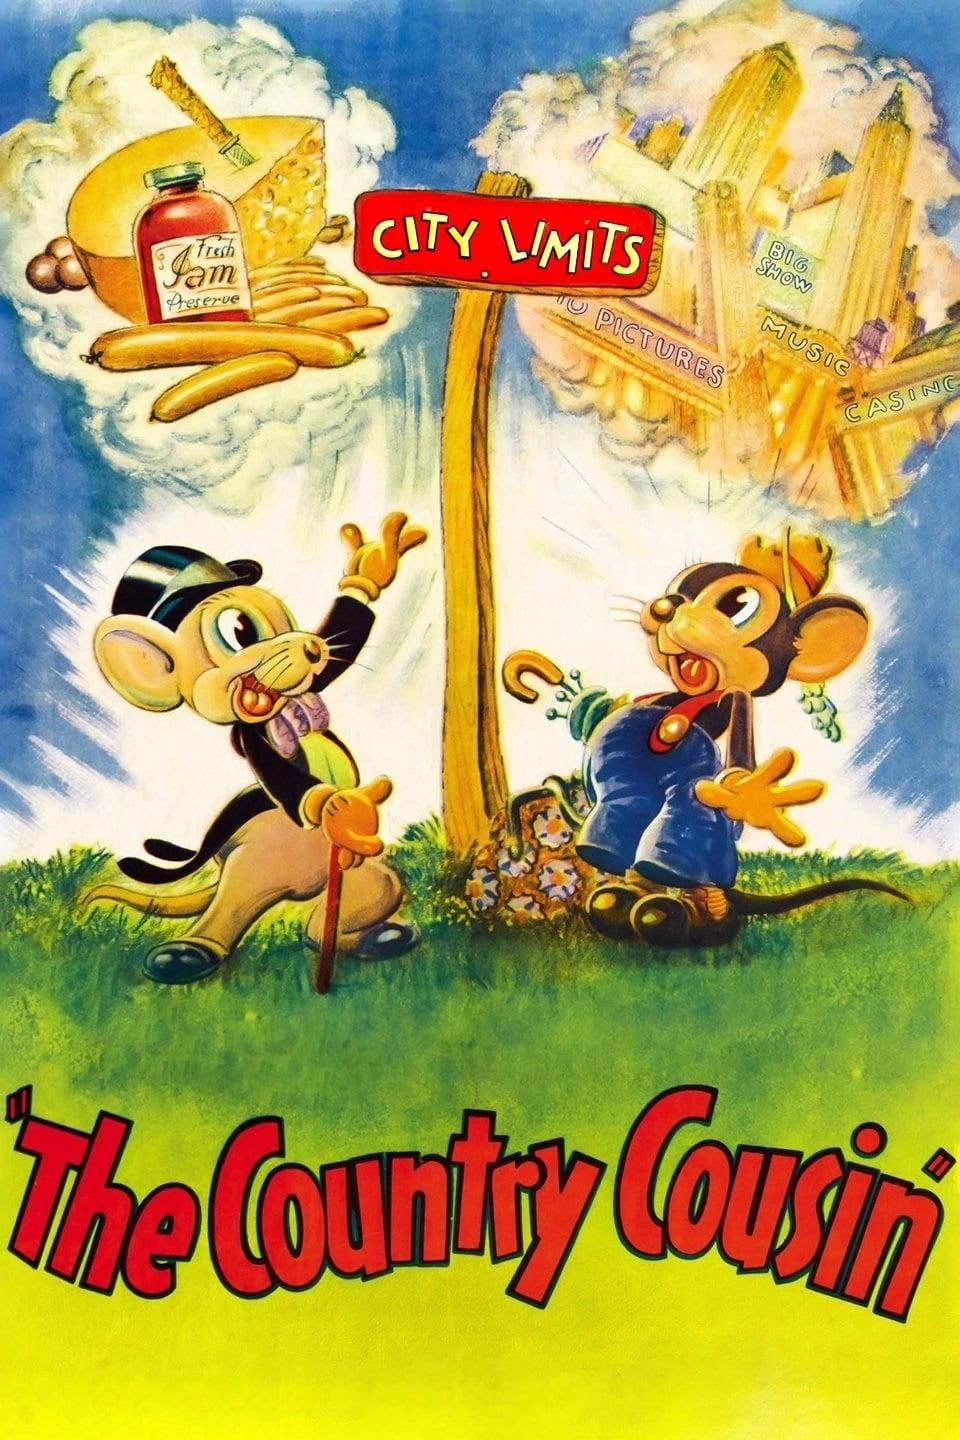 The Country Cousin poster